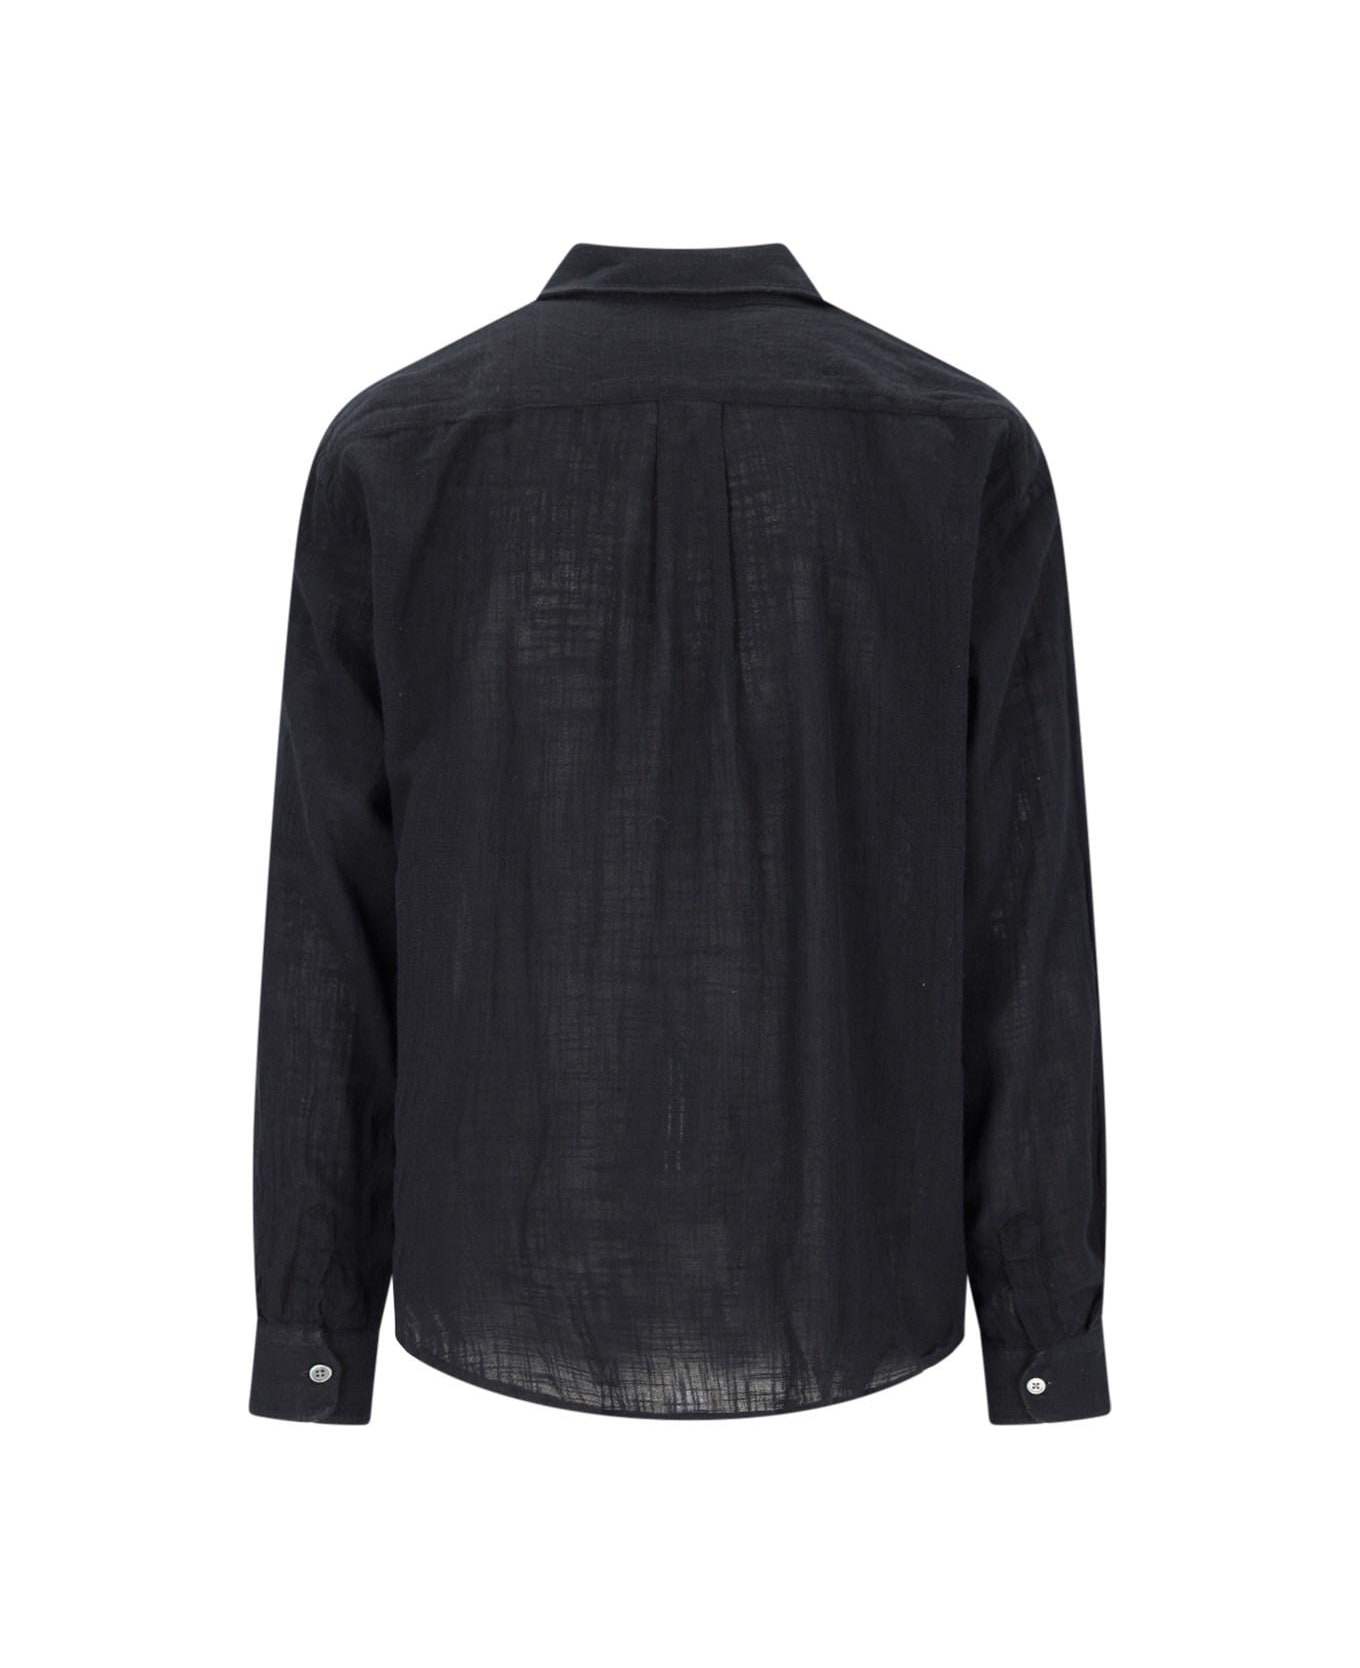 Our Legacy Pocket Shirt - Washed Black Air Cotton